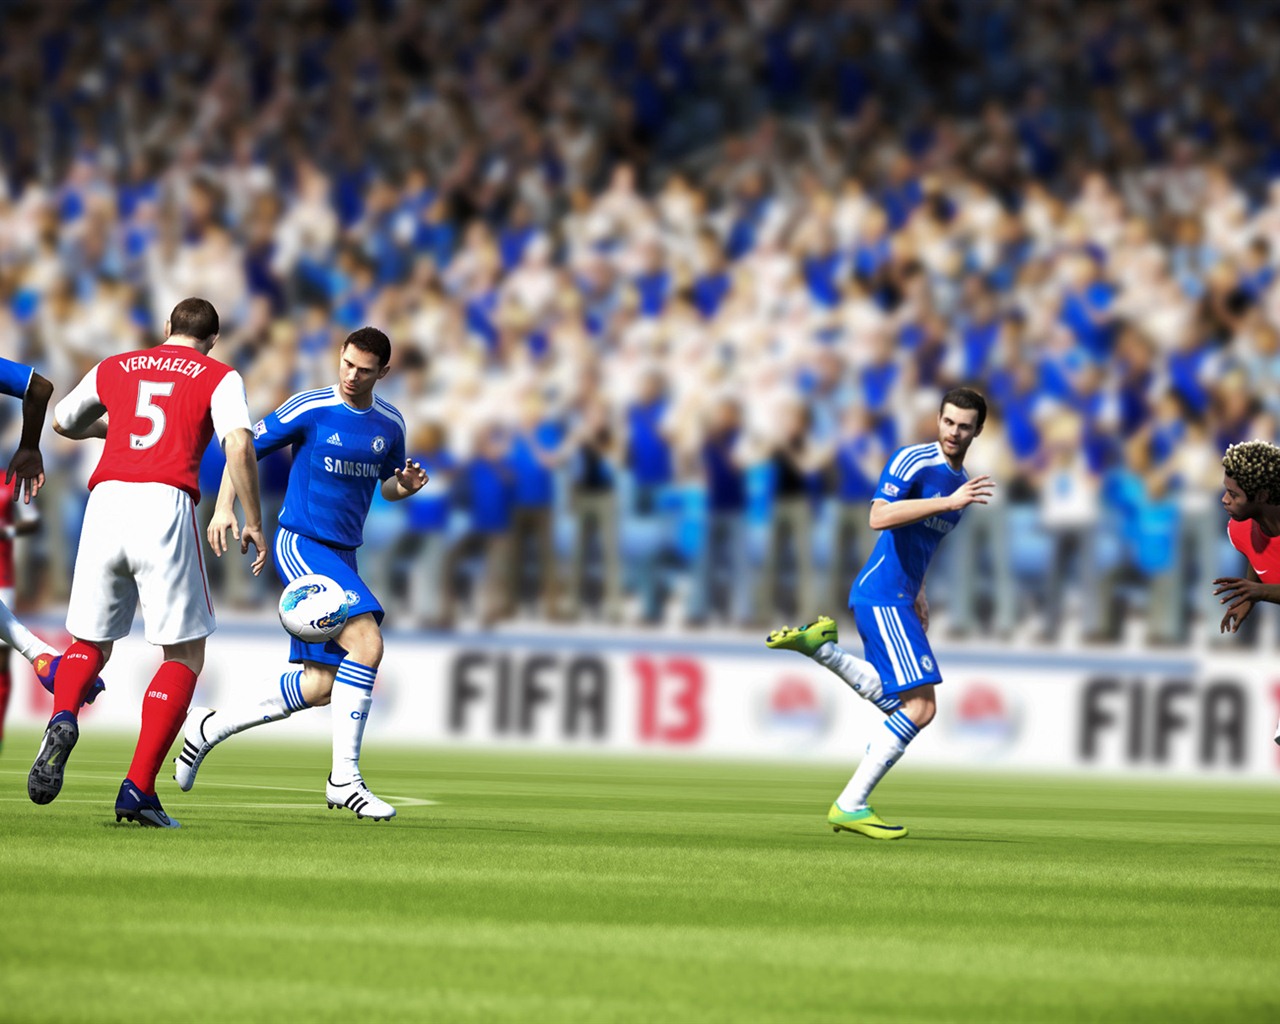 FIFA 13 game HD wallpapers #13 - 1280x1024